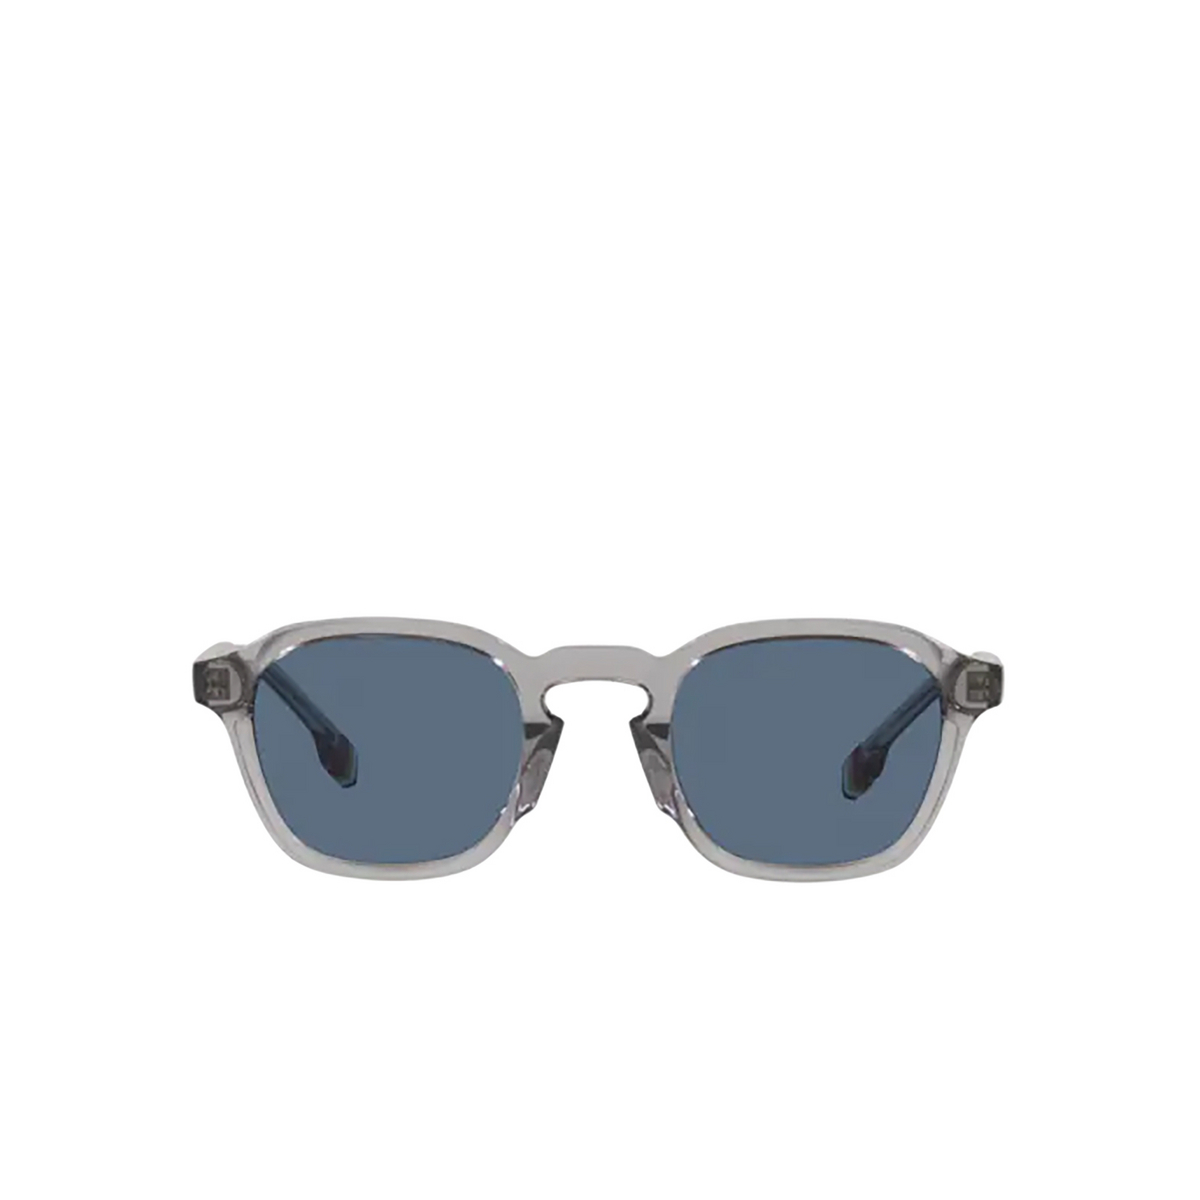 Burberry PERCY Sunglasses 382580 Grey - front view